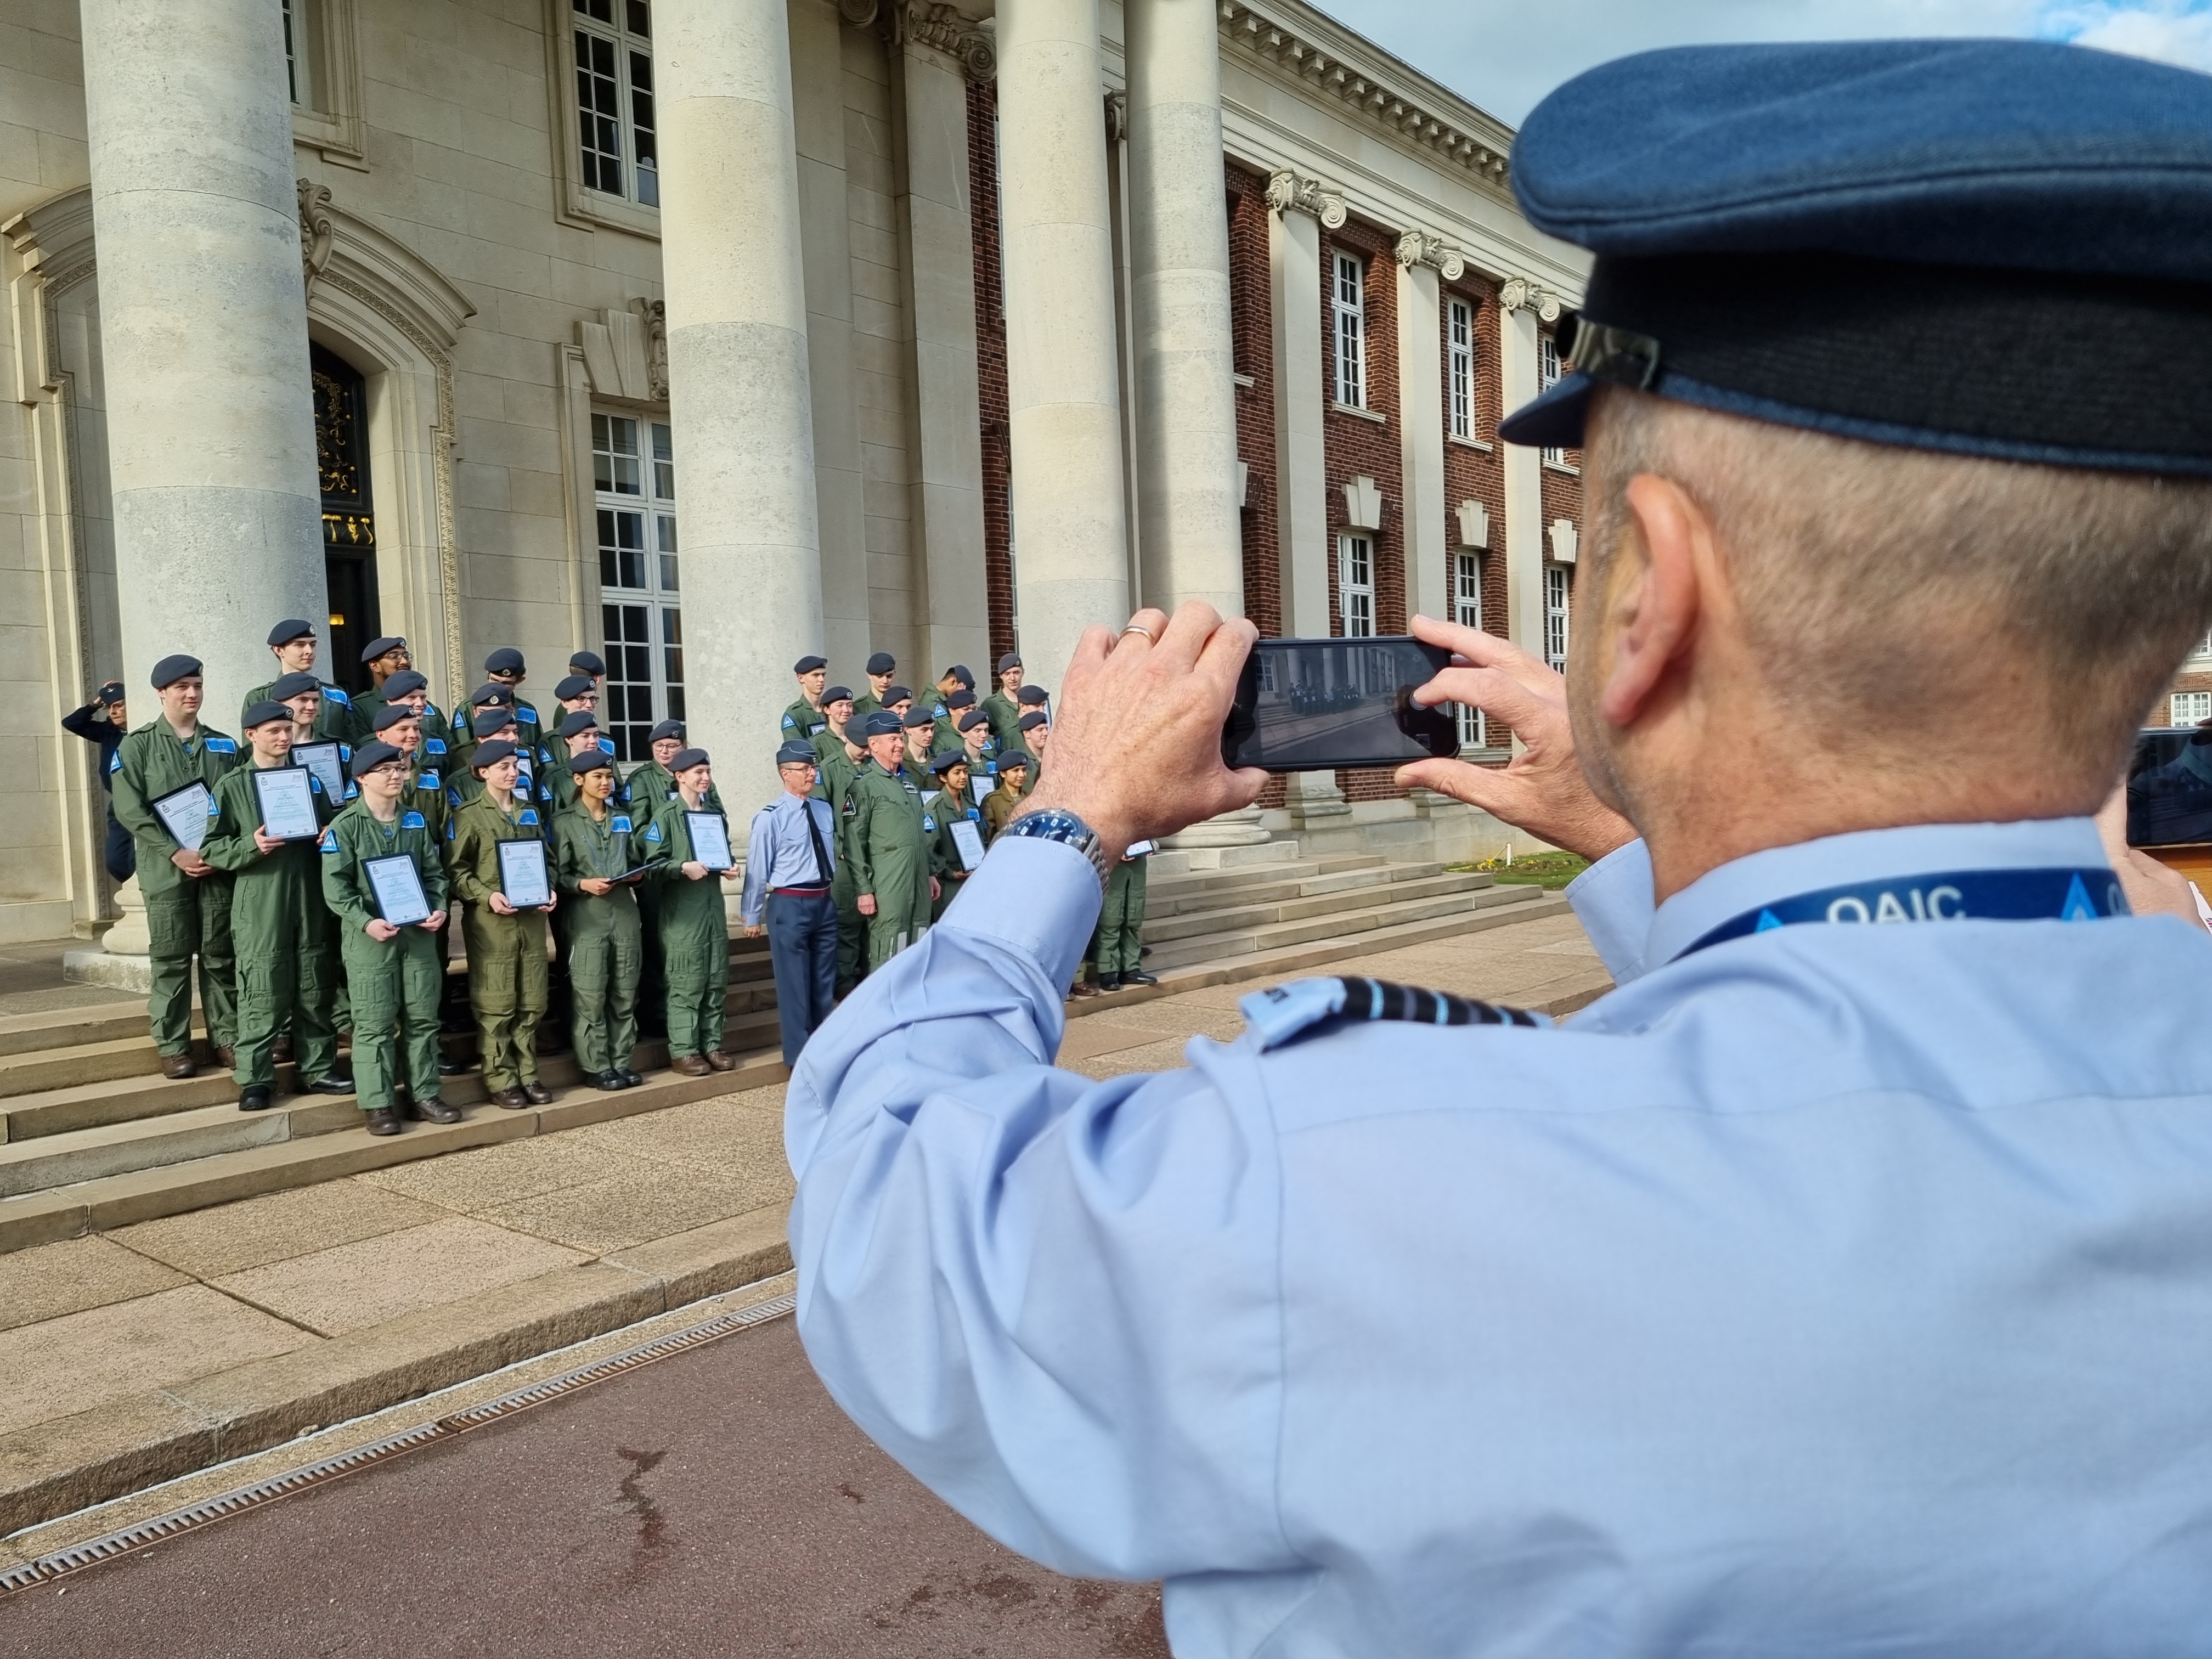 Cadets in uniform on their graduation day.